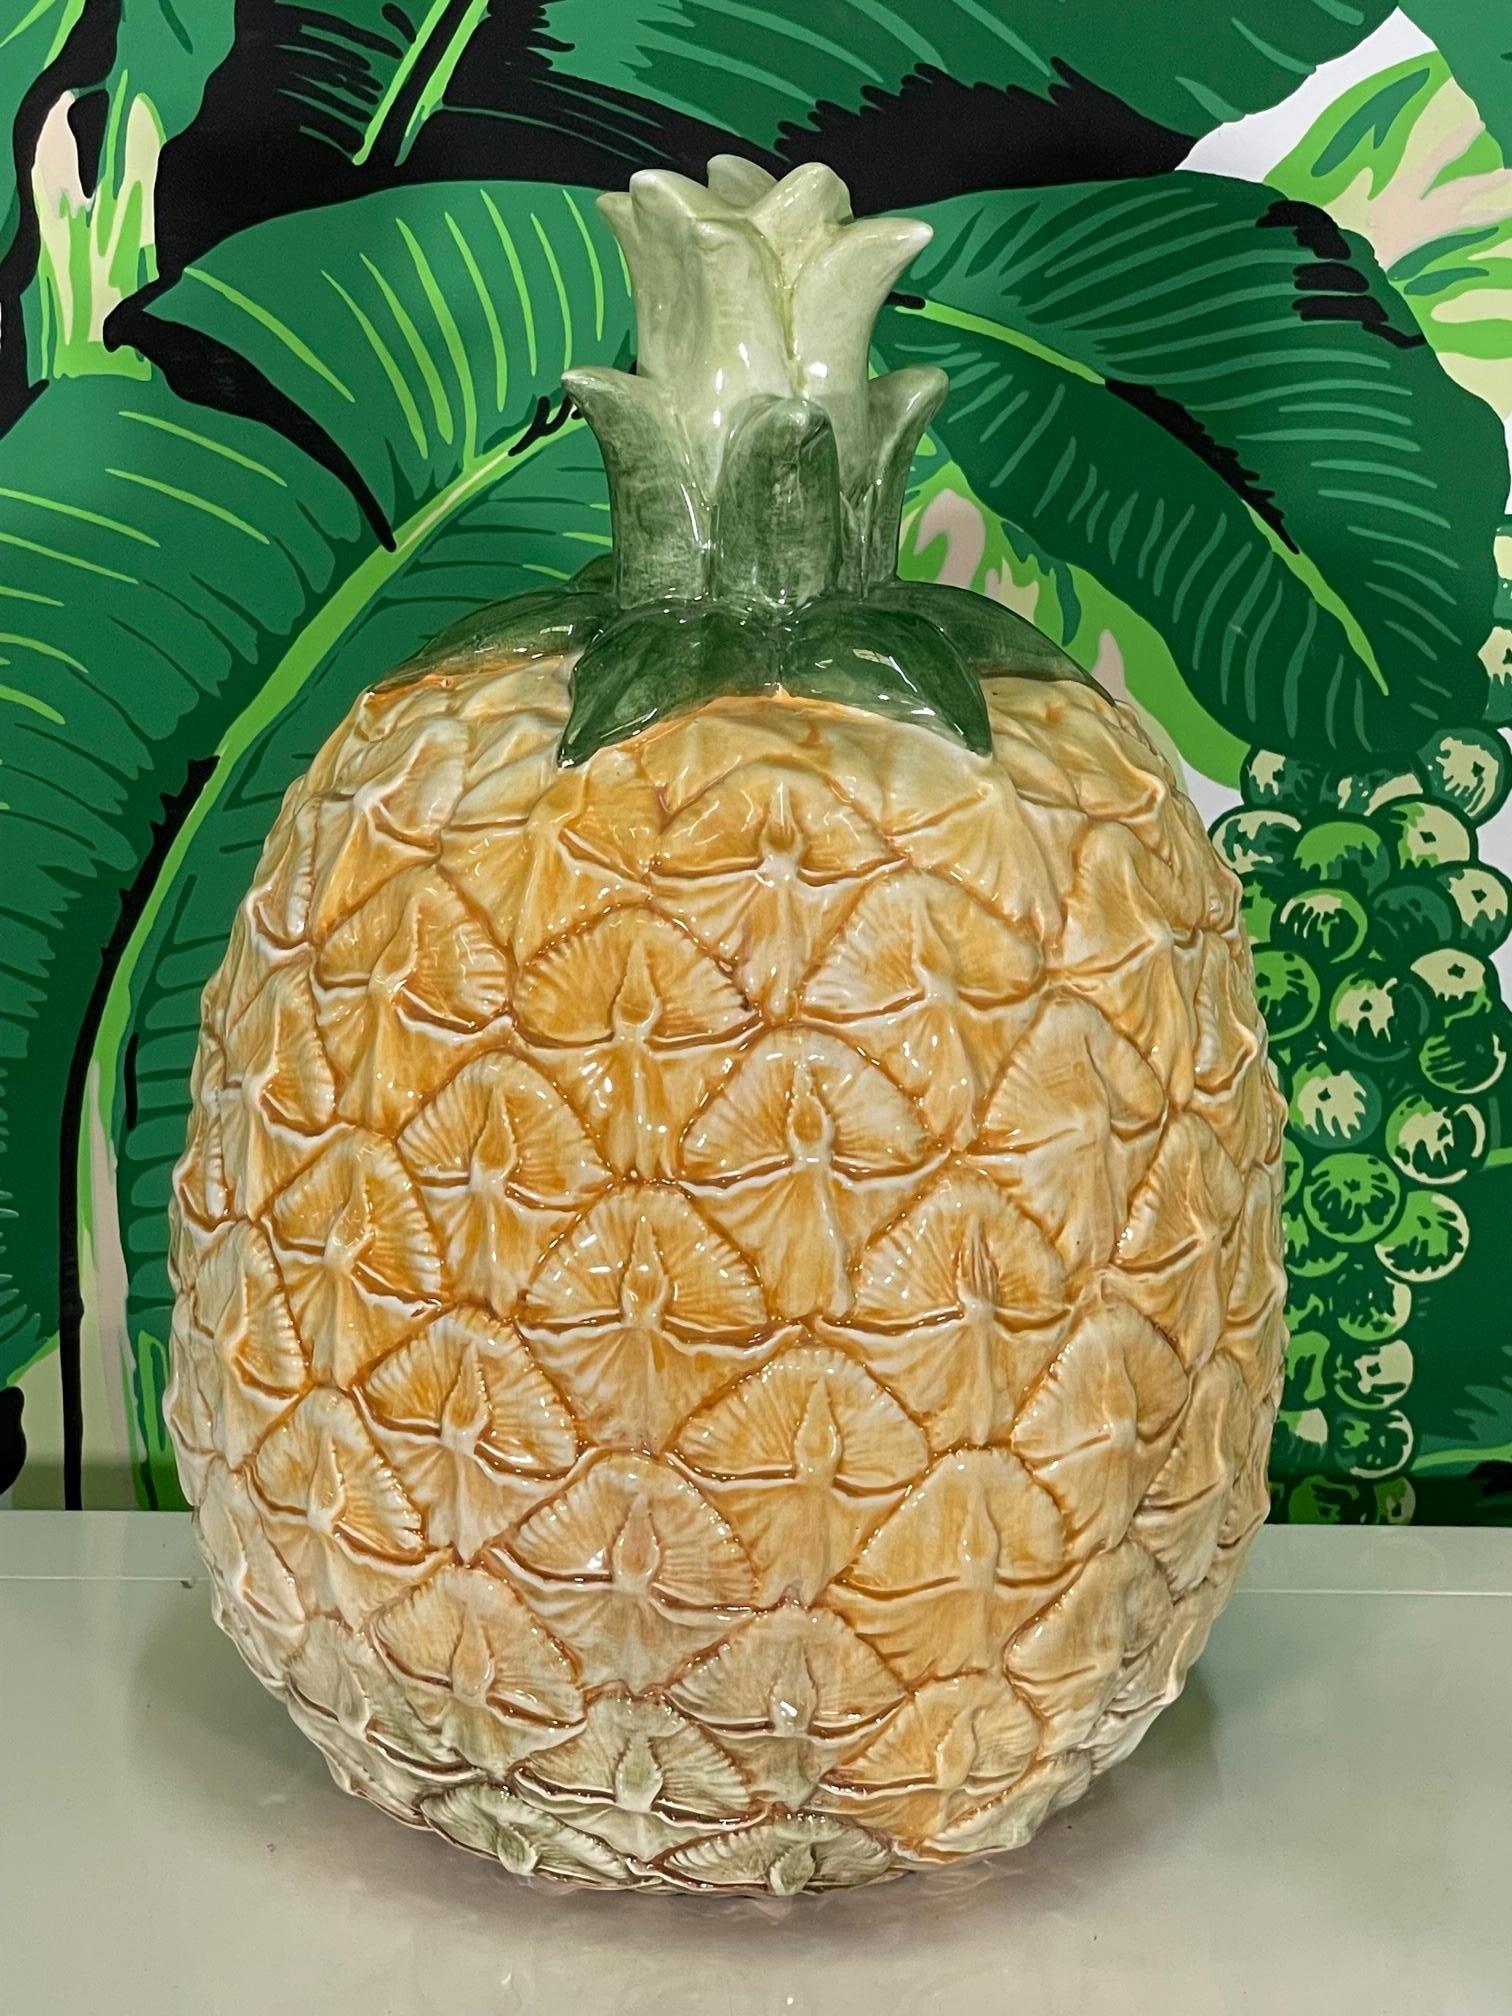 Large ceramic pineapple can be used as a centerpiece or decorative object for display. Hand painted and finished in high gloss glaze. Good condition with only miinor imperfections consistent with age (see photos).
For a shipping quote to your exact